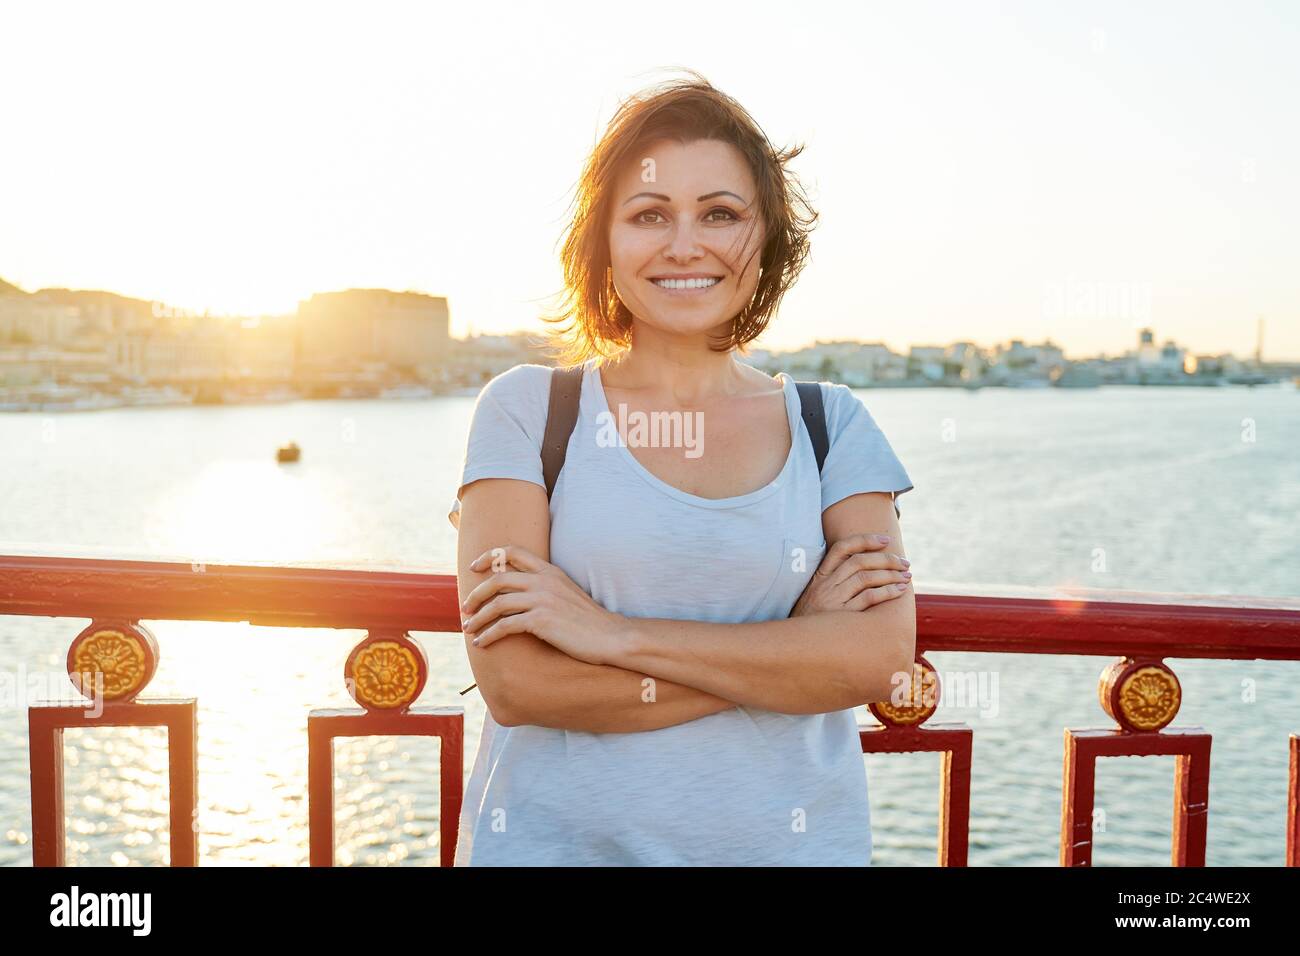 Lifestyle outdoor portrait of mature smiling woman with folded arms Stock Photo